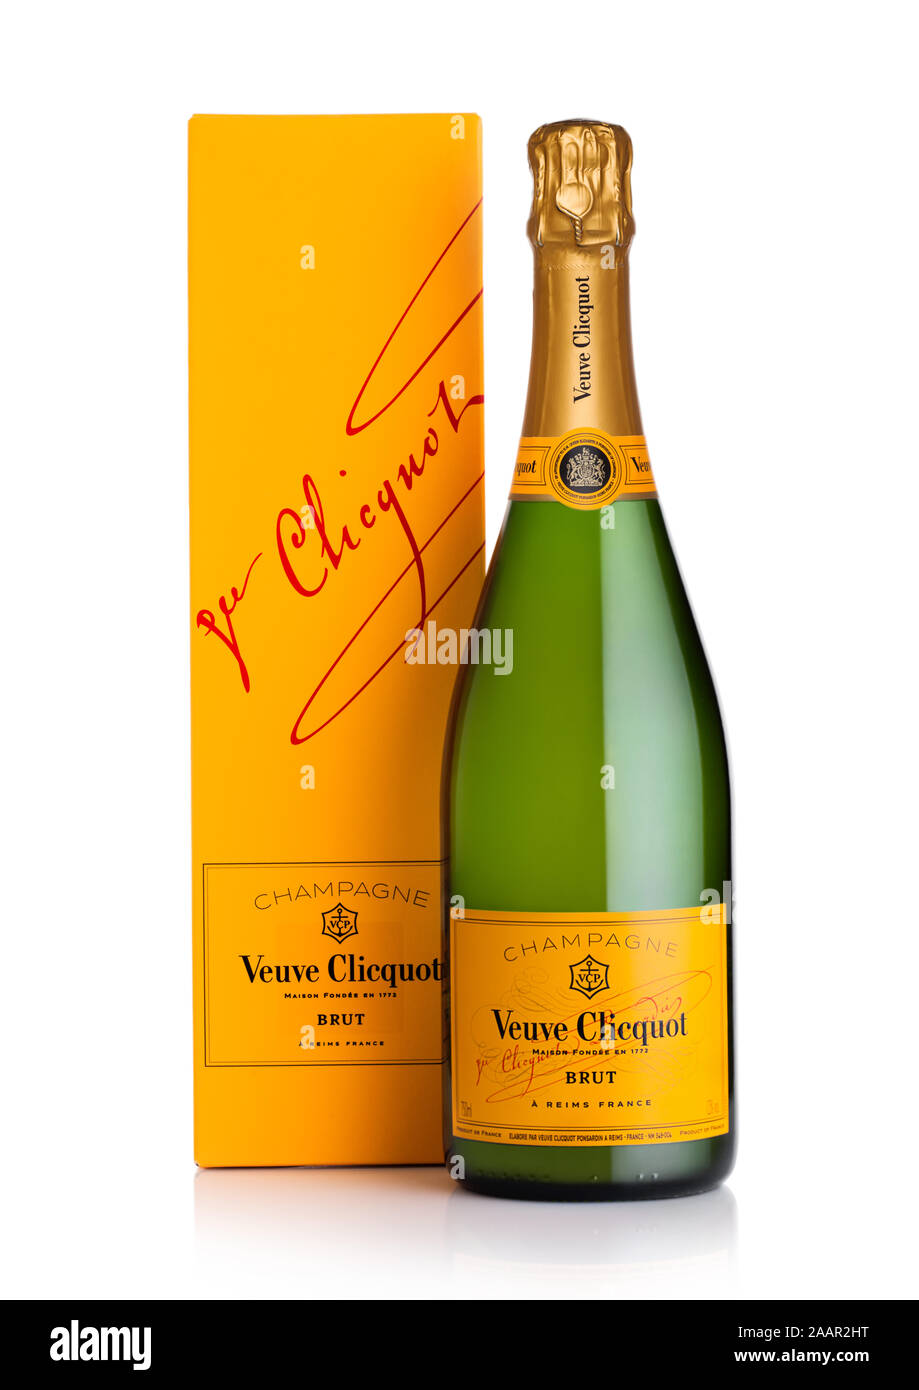 clicquot images Veuve hi-res photography and stock champagne Alamy label -